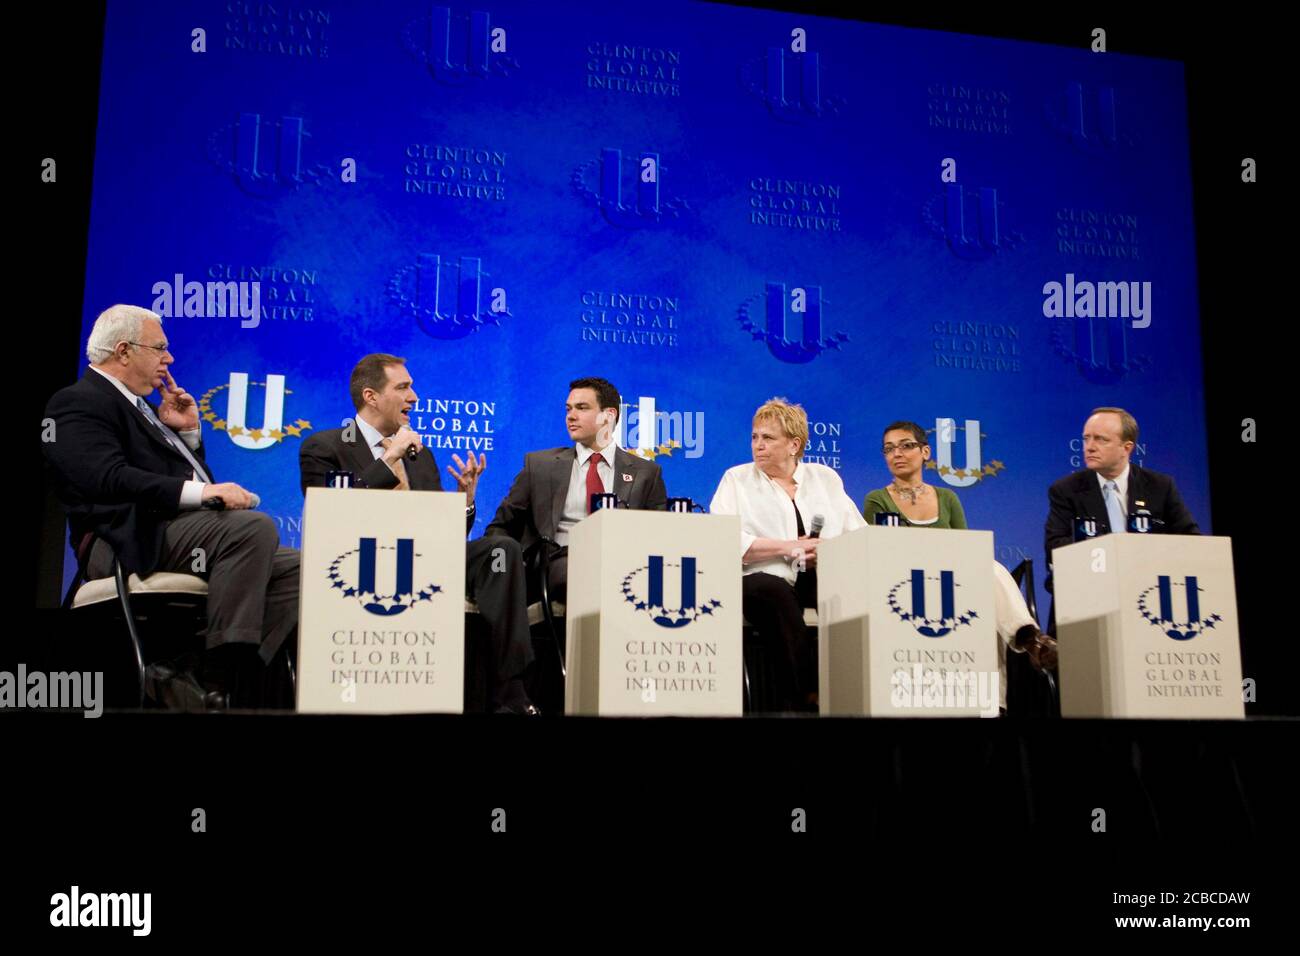 Austin, Texas USA, February 14, 2009: Panelists speak at the second-annual Clinton Global Initiative University, a conference bringing together more than 1,000 students to take action on global challenges such as poverty, hunger, energy, climate change and global health. Left to right are Scott Cowen of Tulane, Carlo Demarco of mtvU, Jonny Dorsey of Stanford, Margaret McKenna of Wal-Mart, Zainab Salbi of Women for Women, and Paul Begala of CNN.   ©Bob Daemmrich Stock Photo